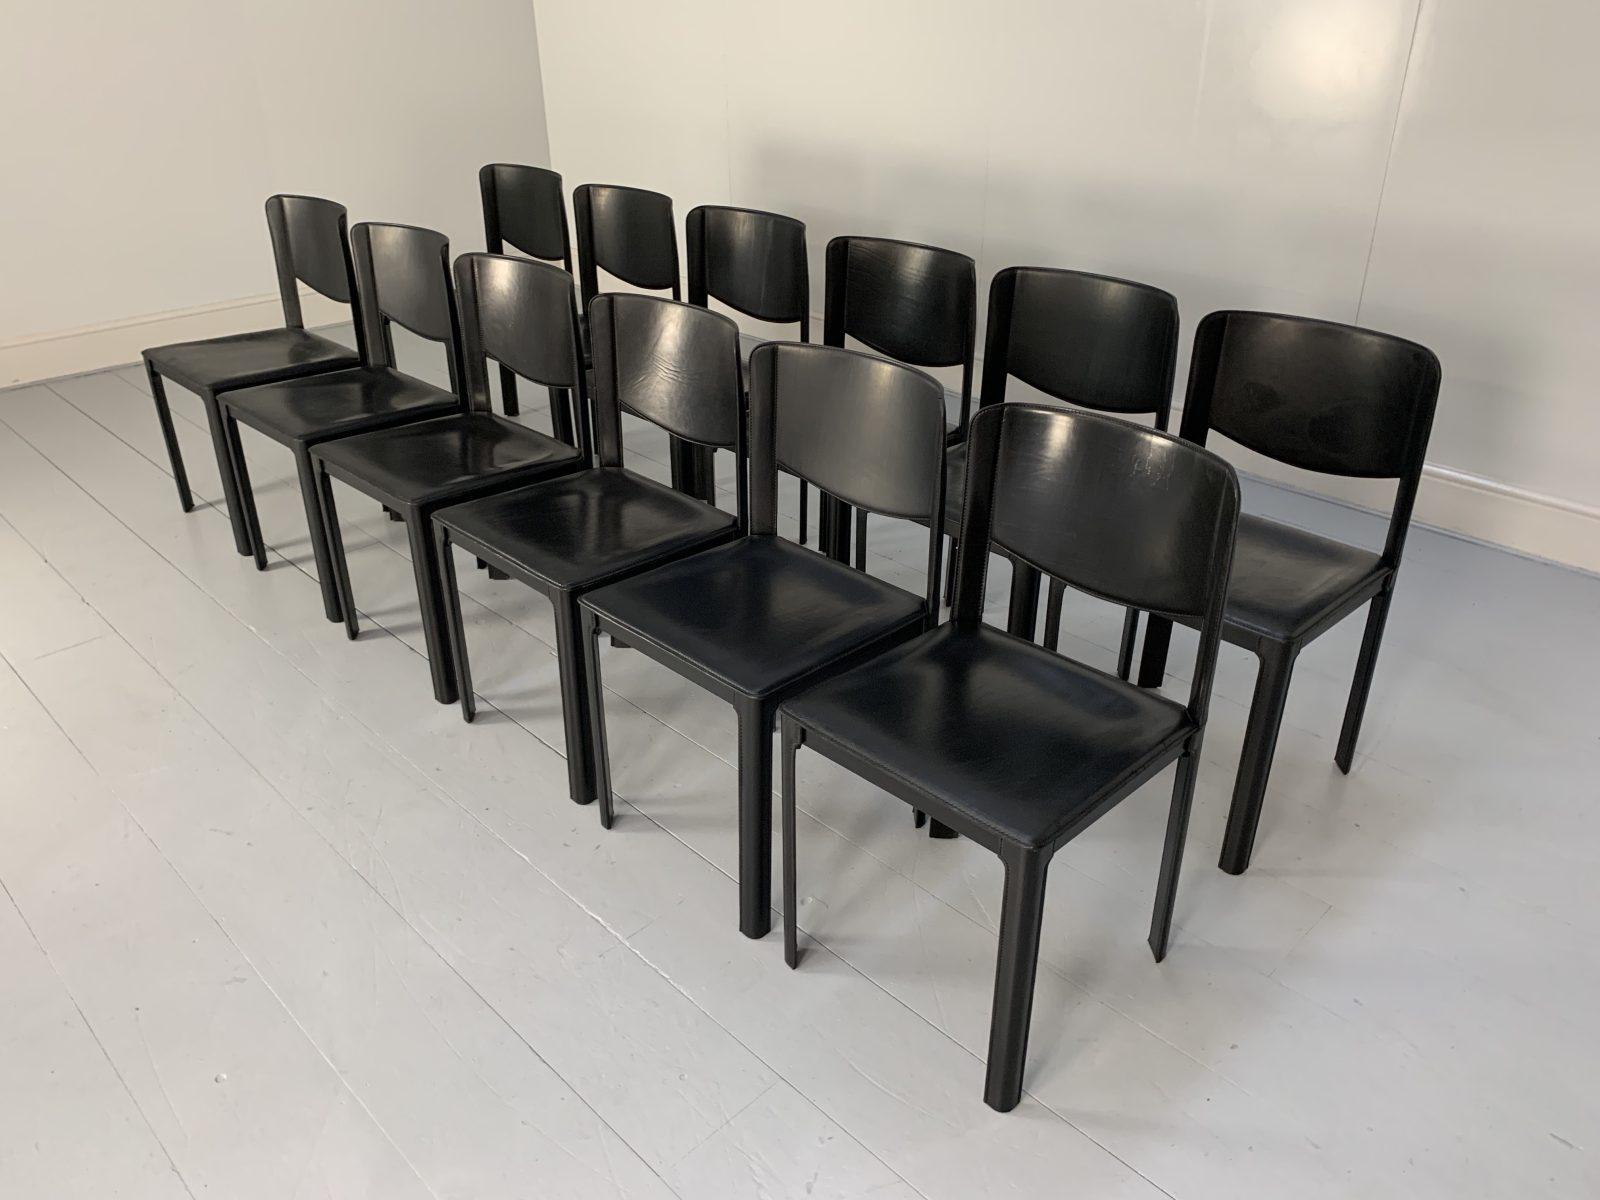 12 Matteo Grassi “Sistina” Dining Chairs, in Black Saddle Leather 1